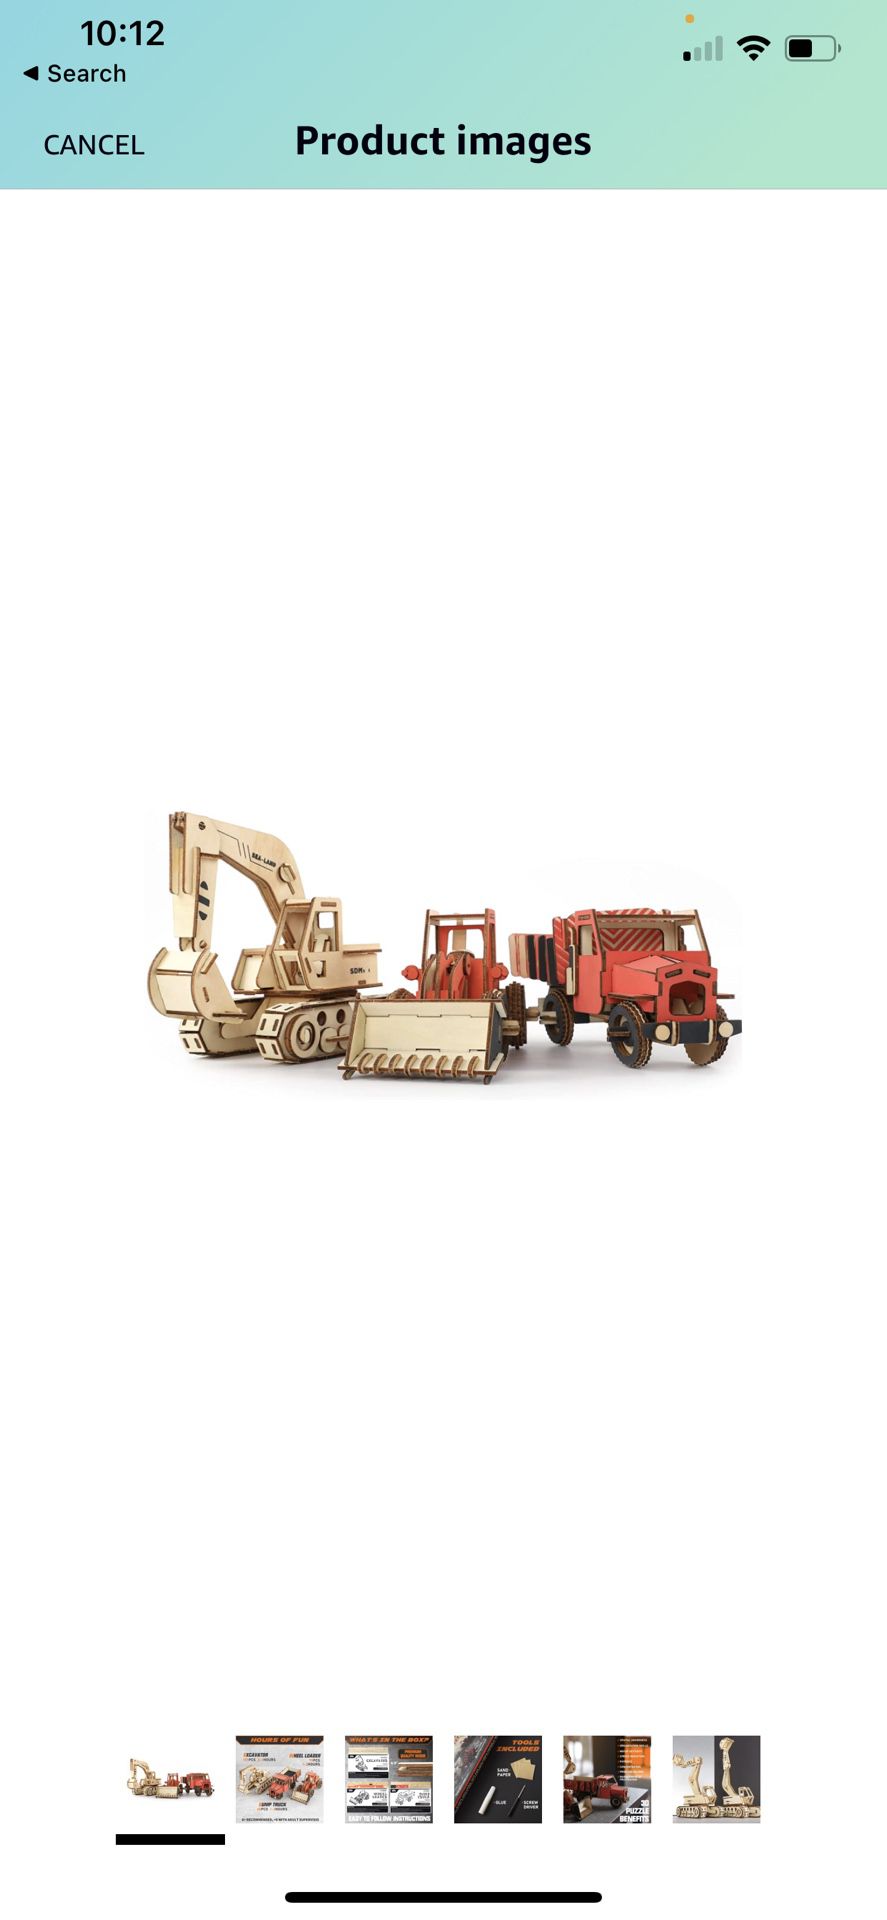 Pack of 3 Construction Vehicle 3D Wooden Puzzles - Excavator Dump Truck Wheel Loader, Mechanical Building Models, Craft Kits for Adults Men Teens